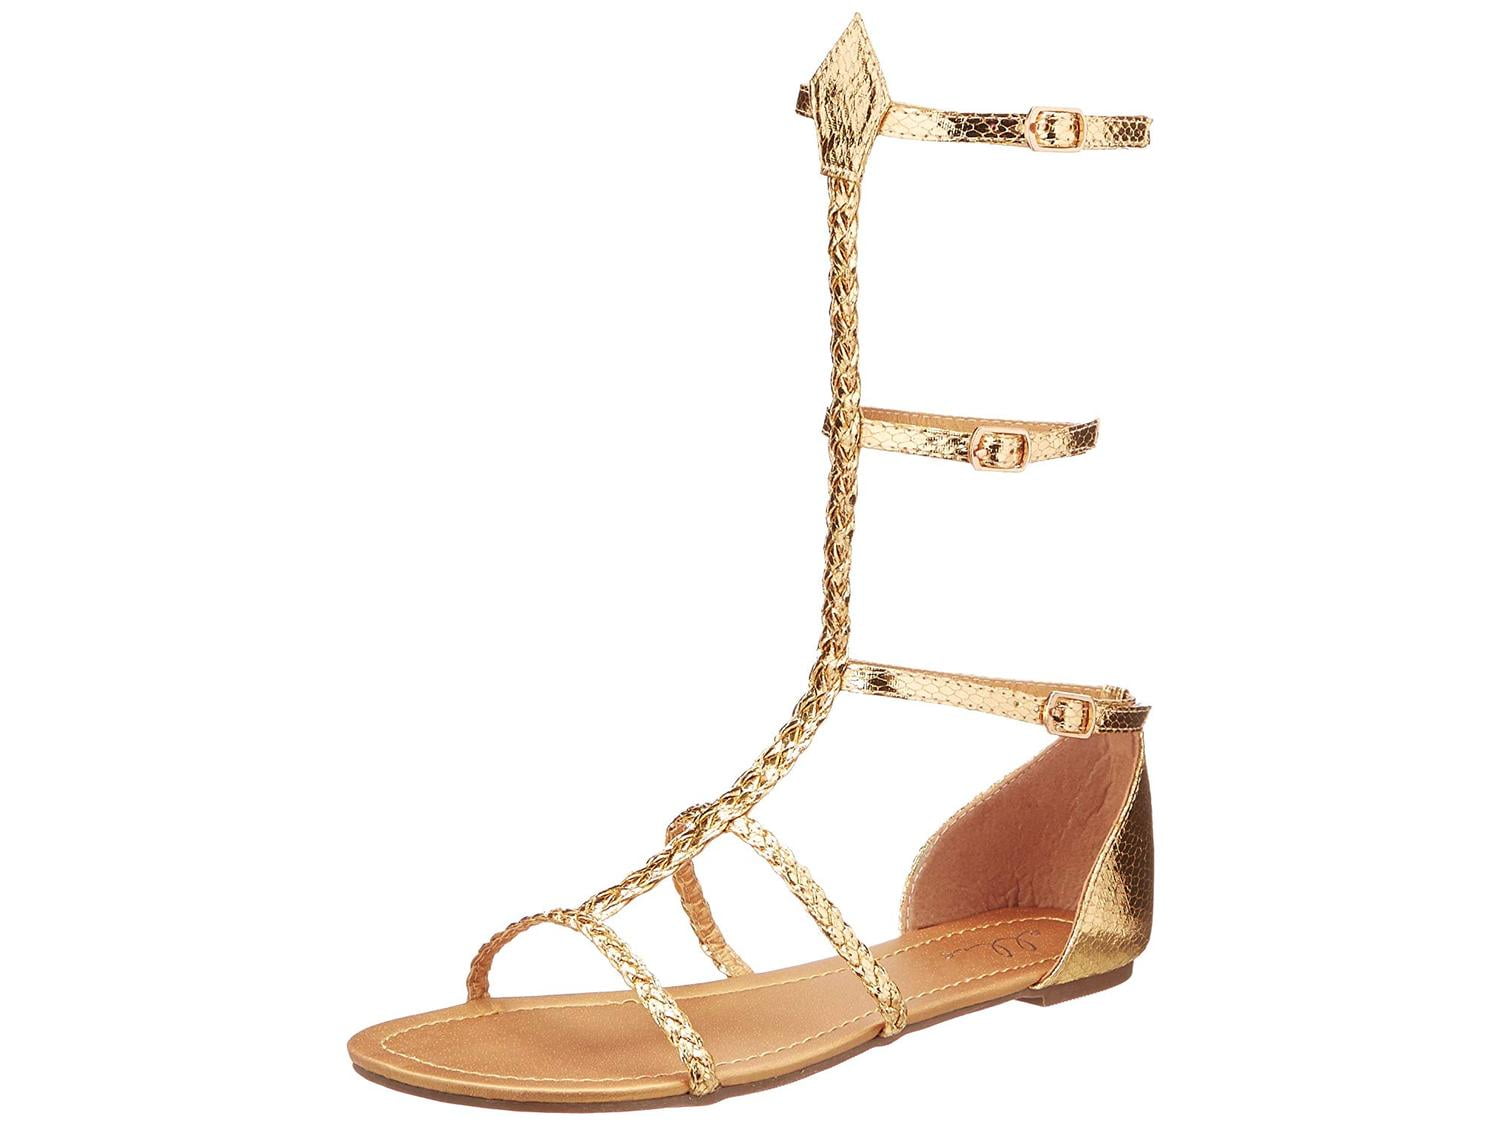 ELLIE SHOES - Ellie Shoes Womens 015-cairo Open Toe Casual Gladiator ...